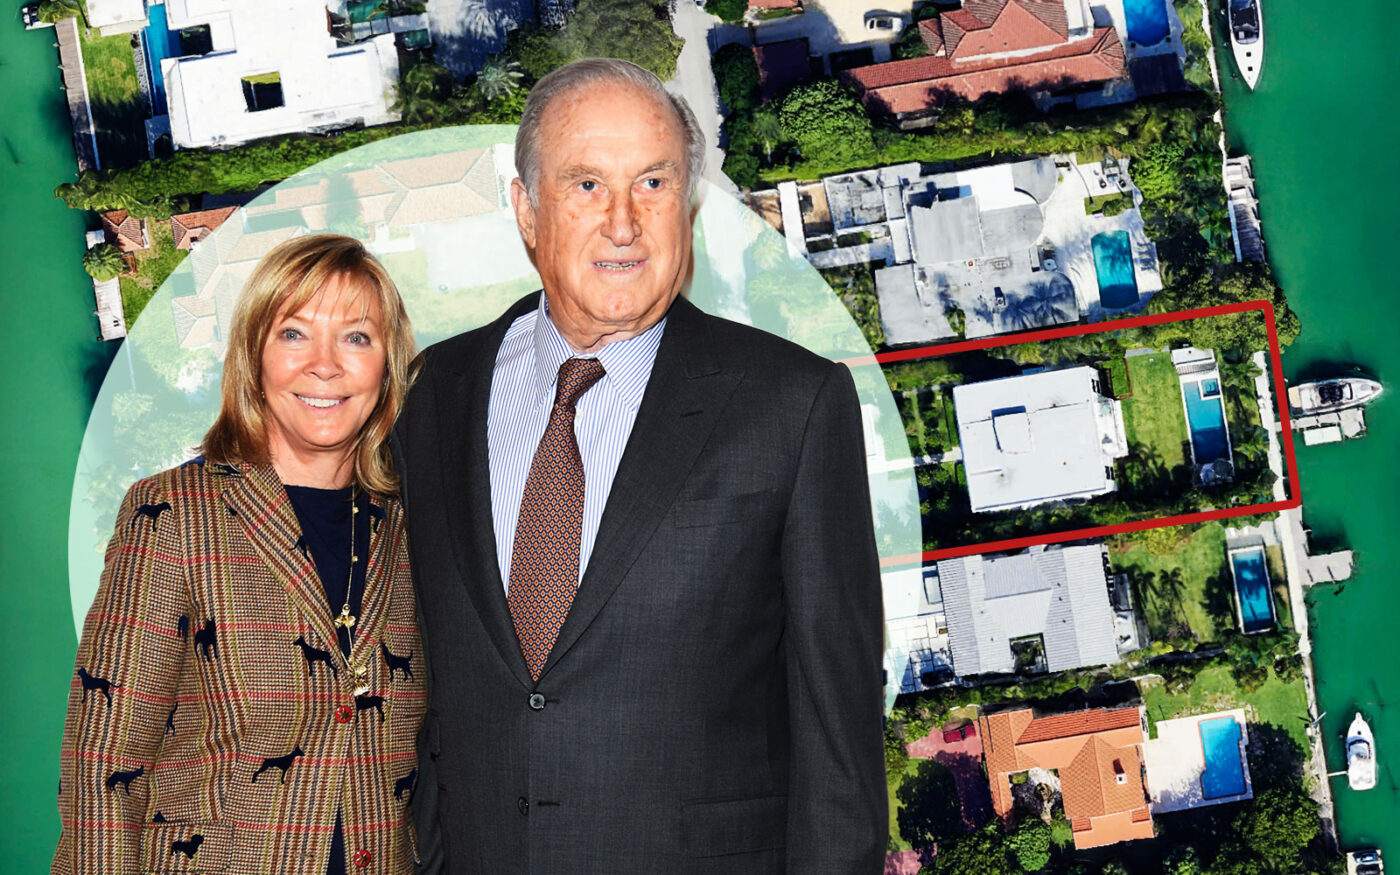 Eastdil Founder’s Widow Sells Miami Beach House for $16M